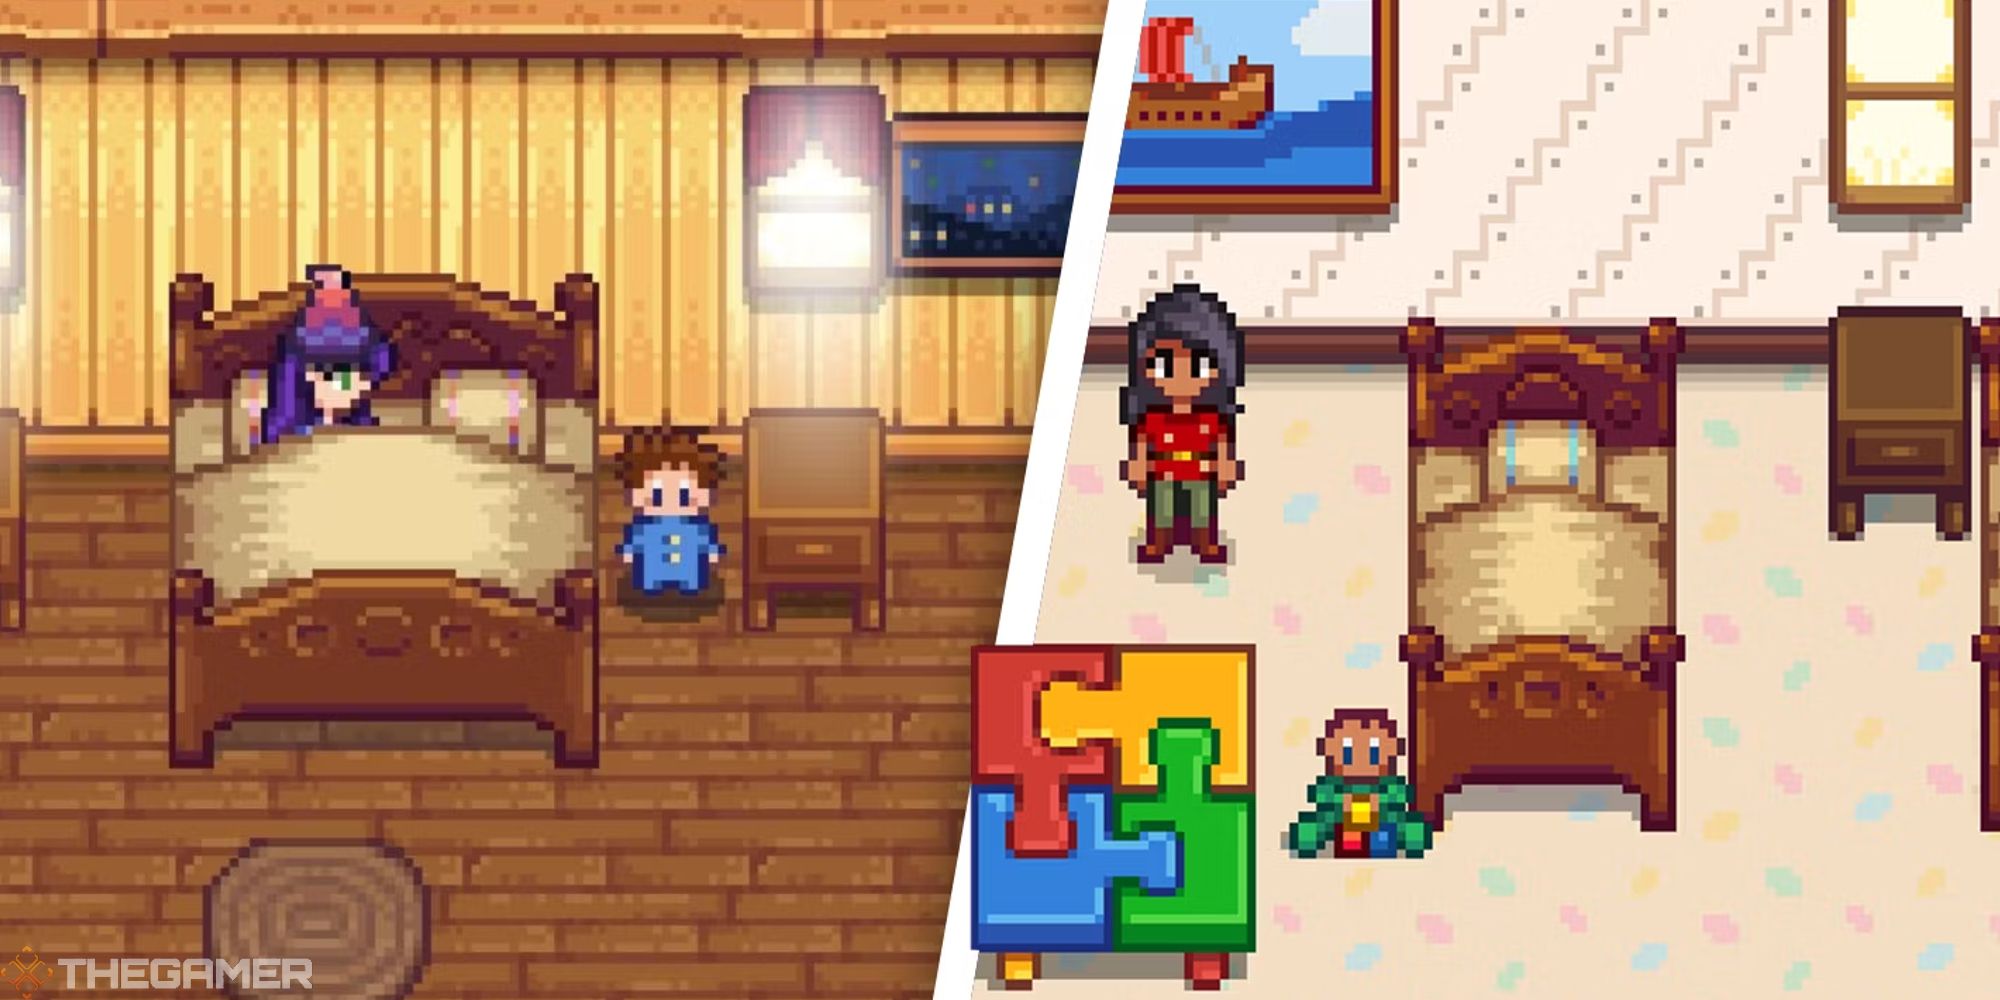 split image showing player in bed with child nearby, next to image of player and child in kids bedroom